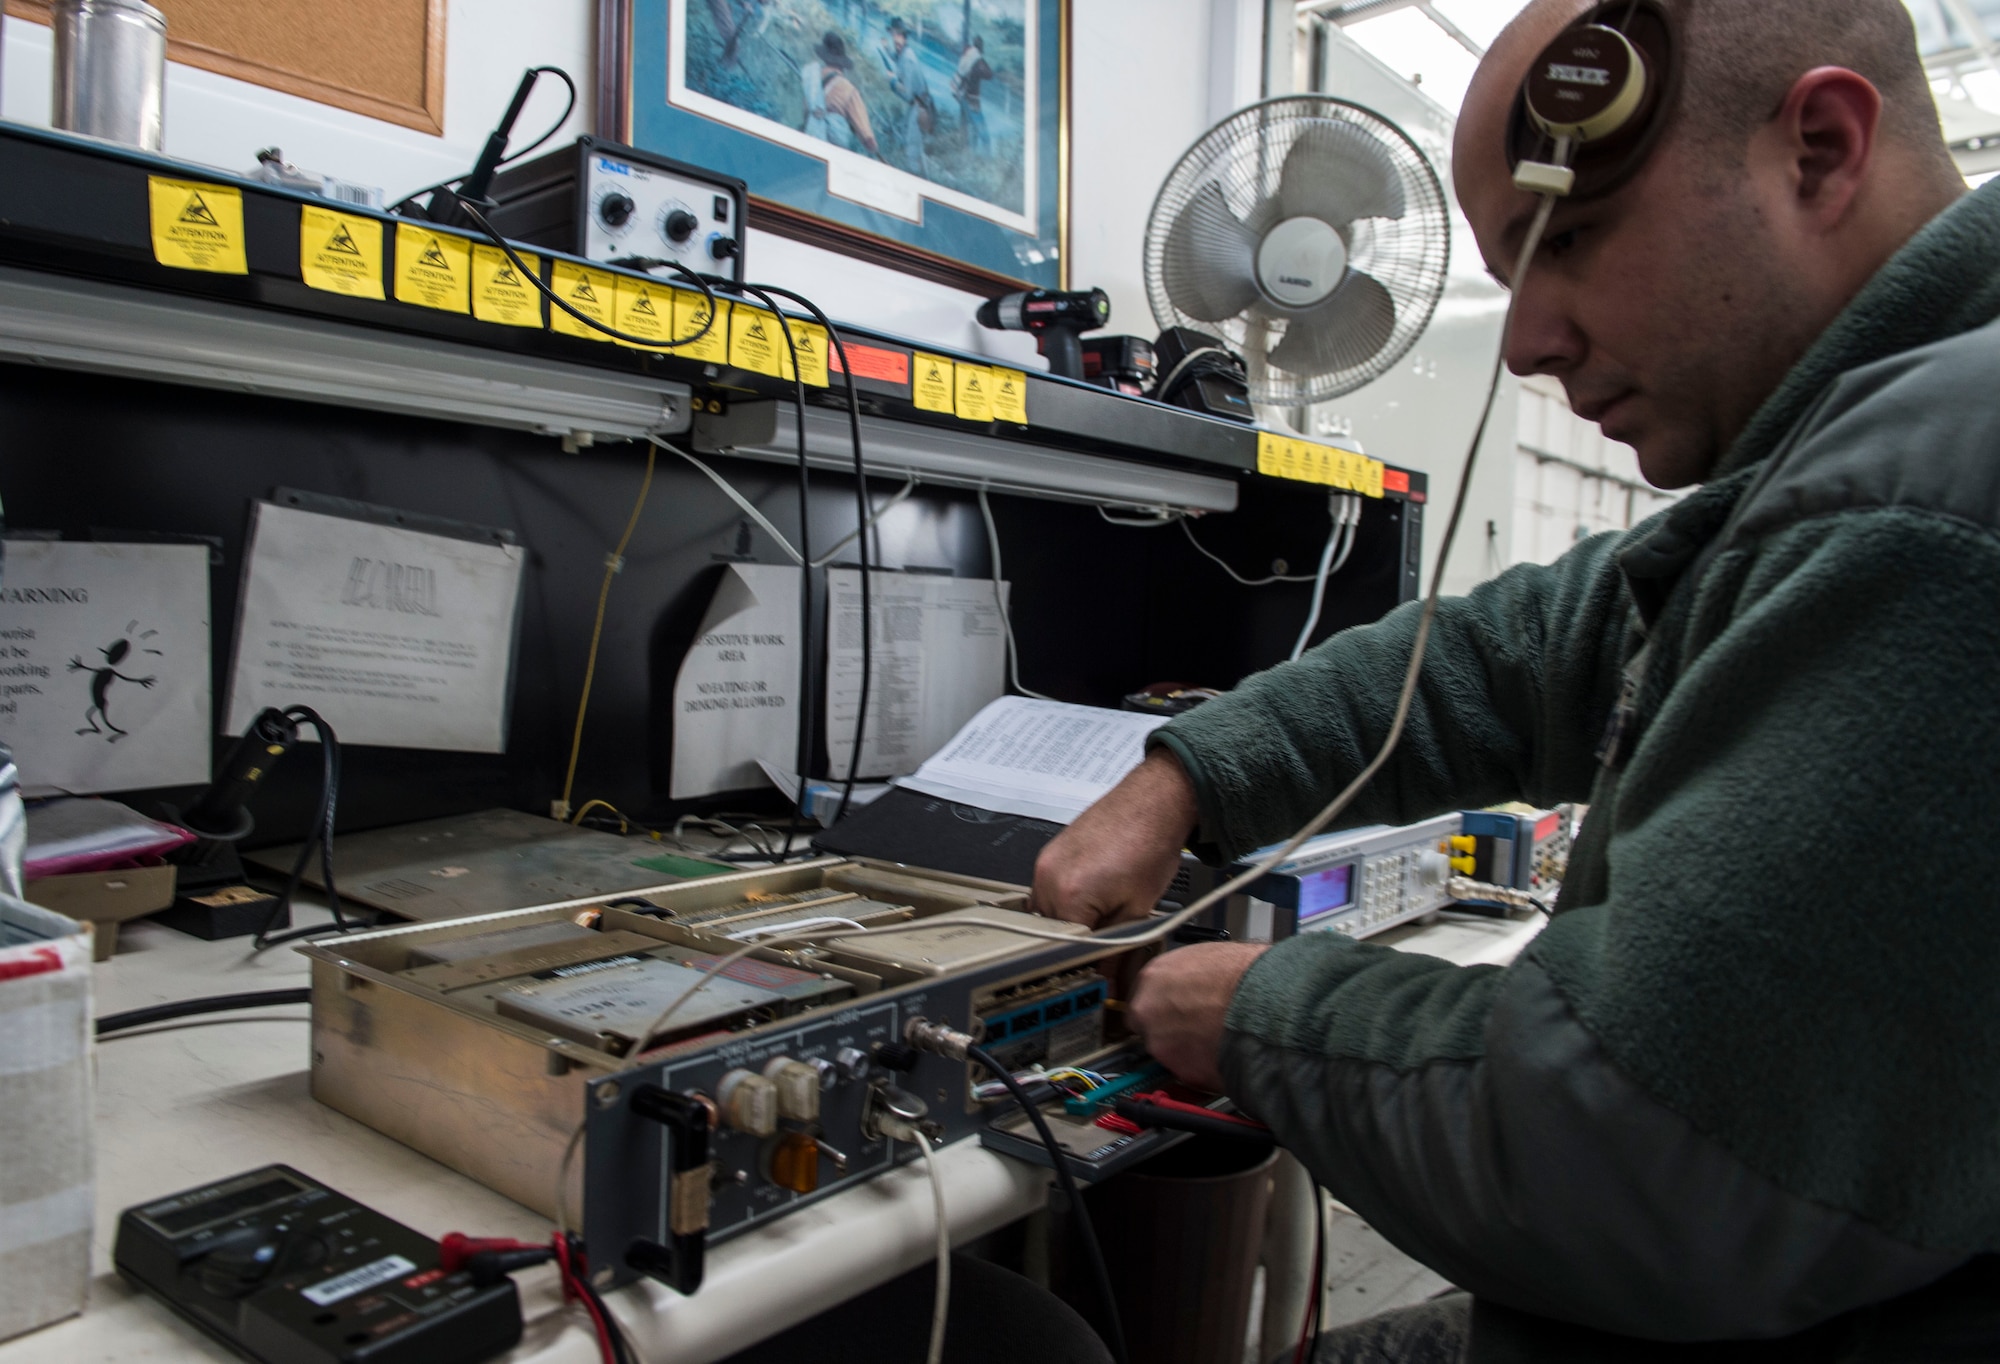 Staff Sgt. Derrick Shelton, 424th Air Base Squadron airfield systems technician, repairs a radio at Chièvres Air Base, Belgium, Feb. 25, 2016. Airmen from the 424th ABS provide airfield operations support for the Supreme Allied Commander Europe and Supreme Headquarters Allied Powers Europe, NATO transient aircraft and distinguished visitors. (U.S. Air Force photo/Staff Sgt. Sara Keller)